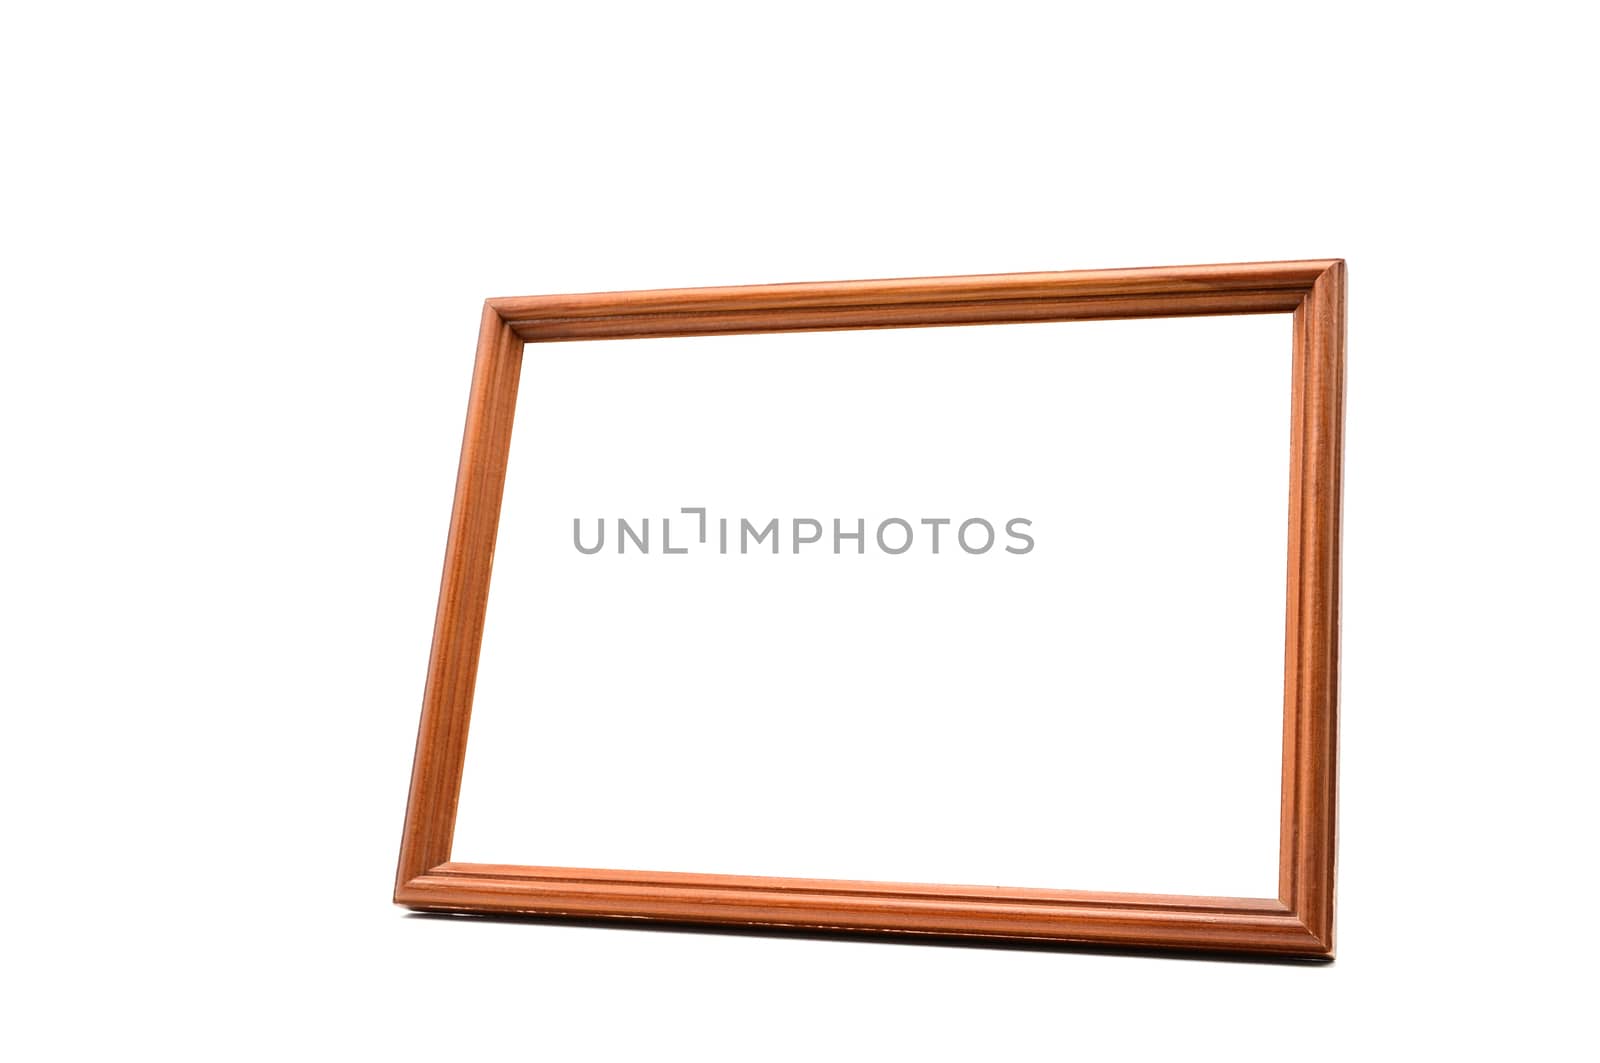 Vintage wooden photo frame on an isolated white background
